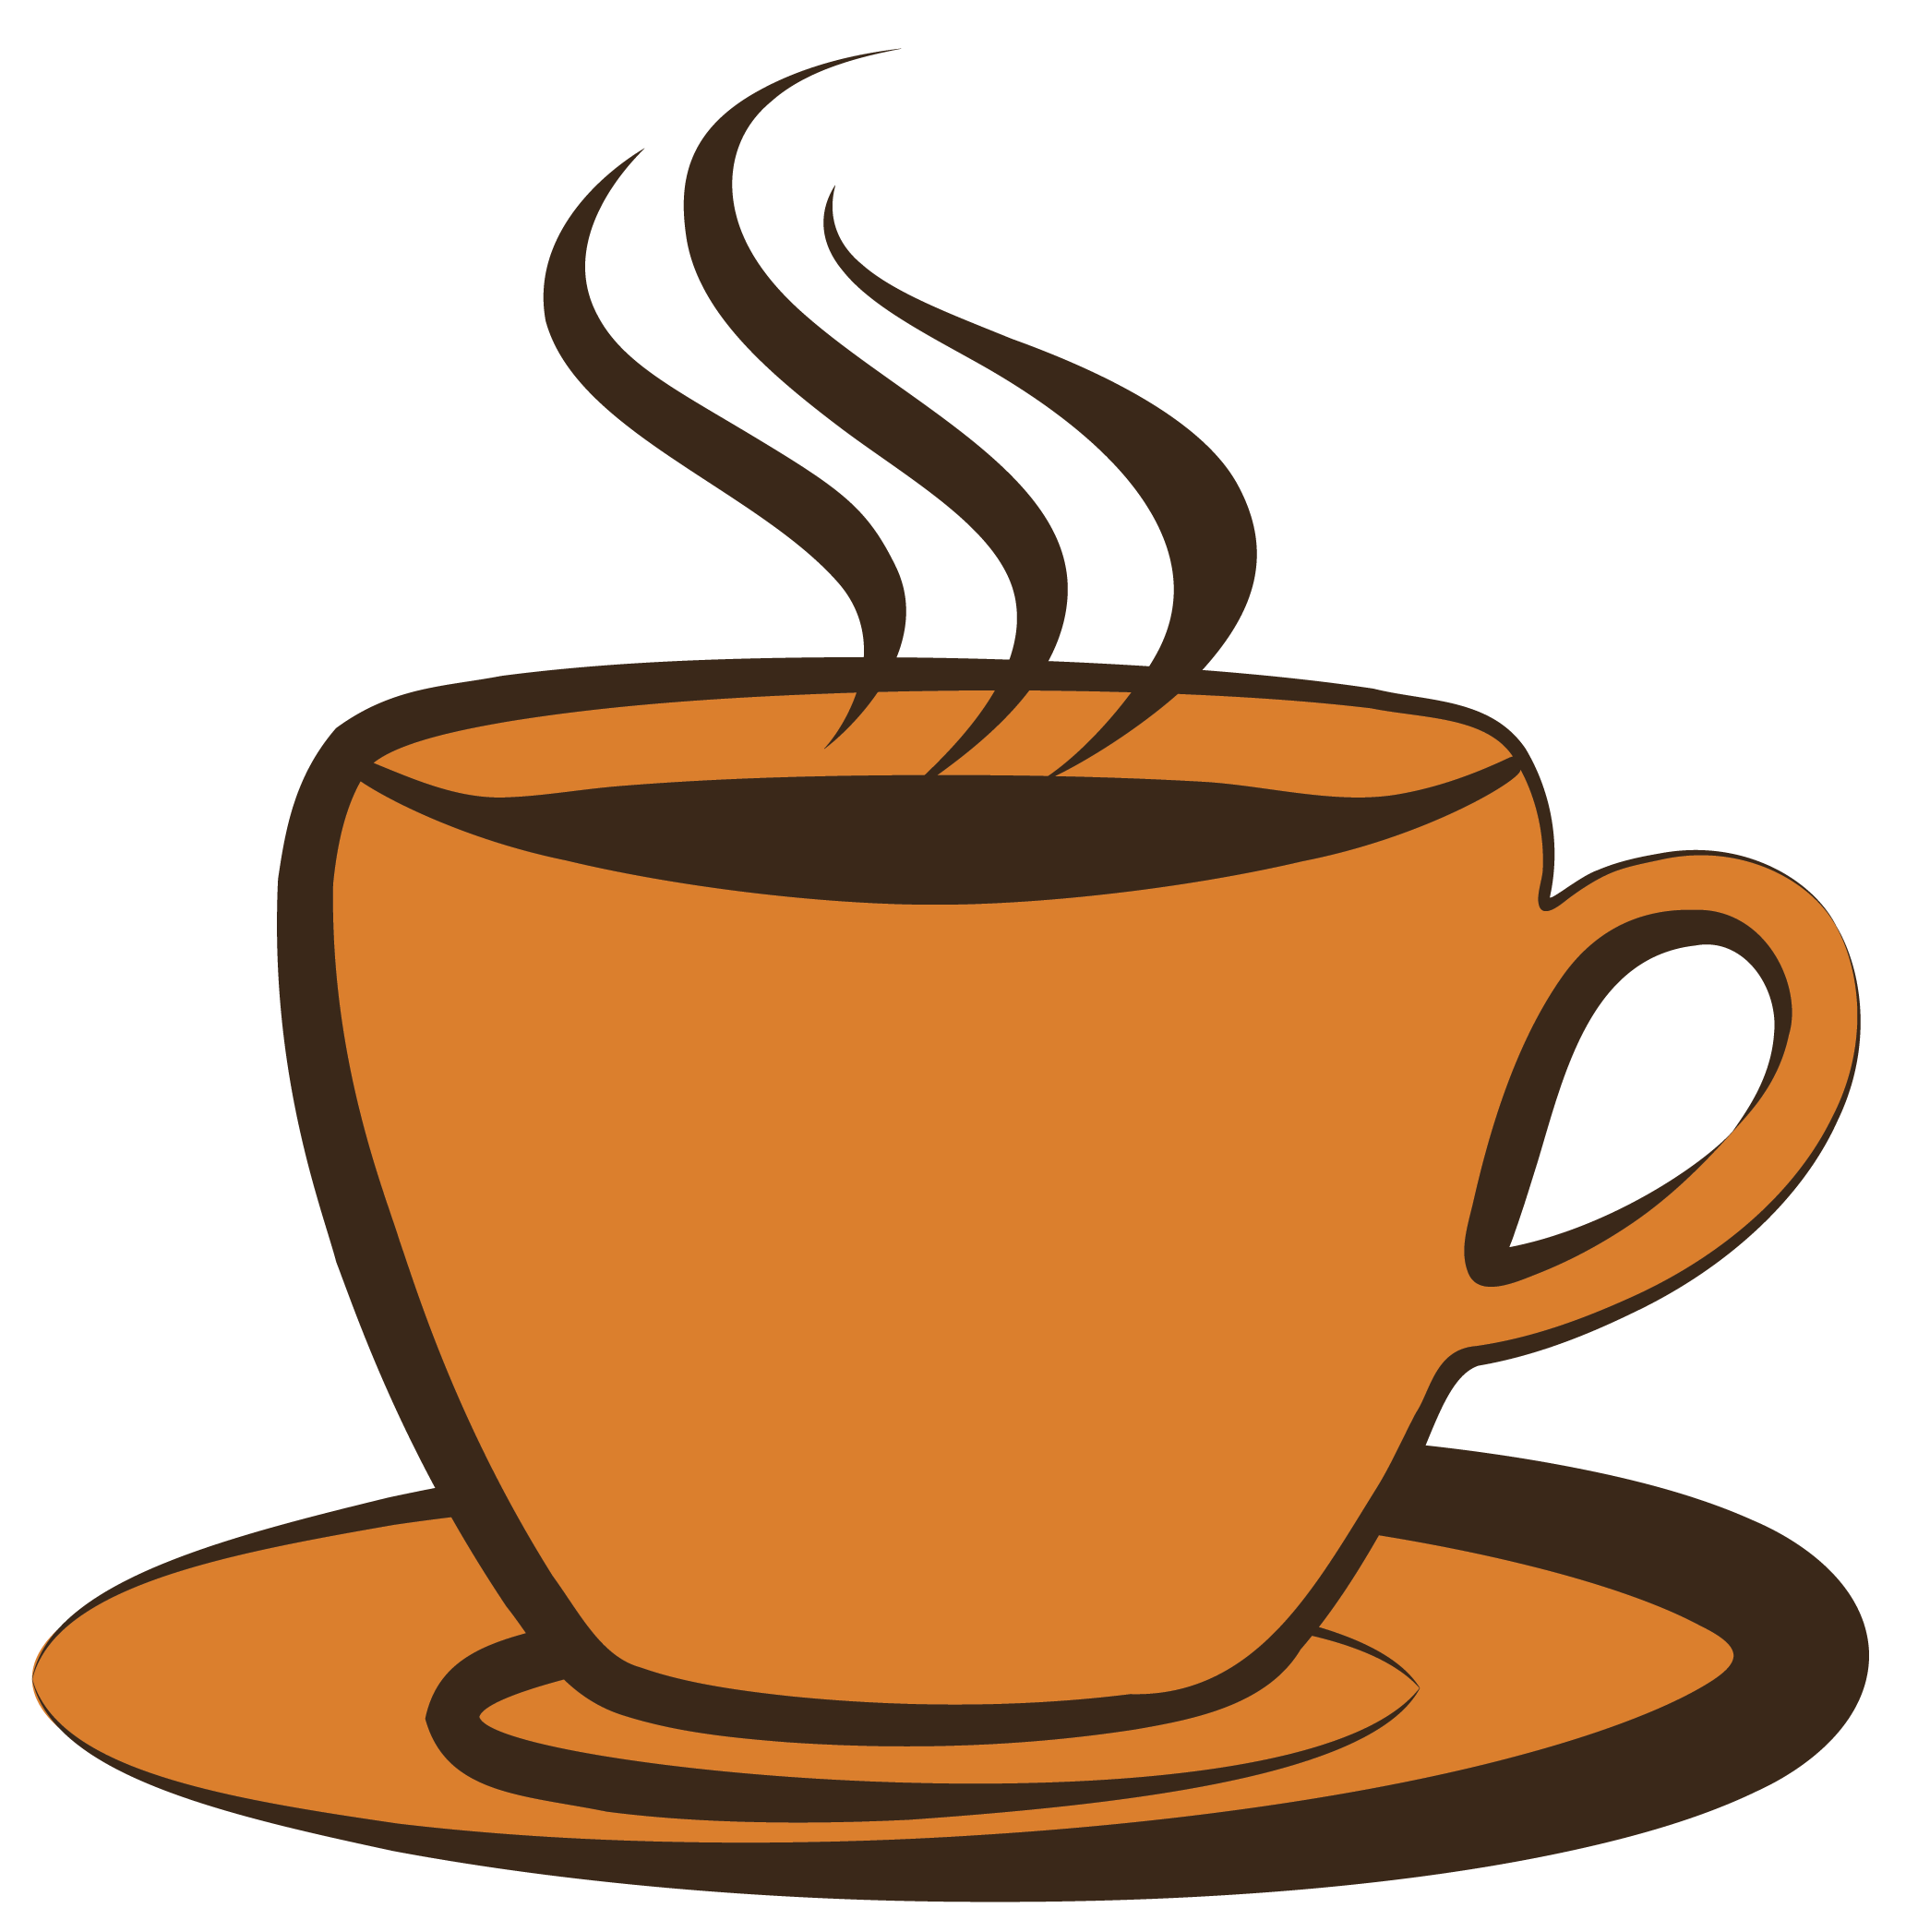 Coffee cup clip art free perf - Cup Of Coffee Clipart